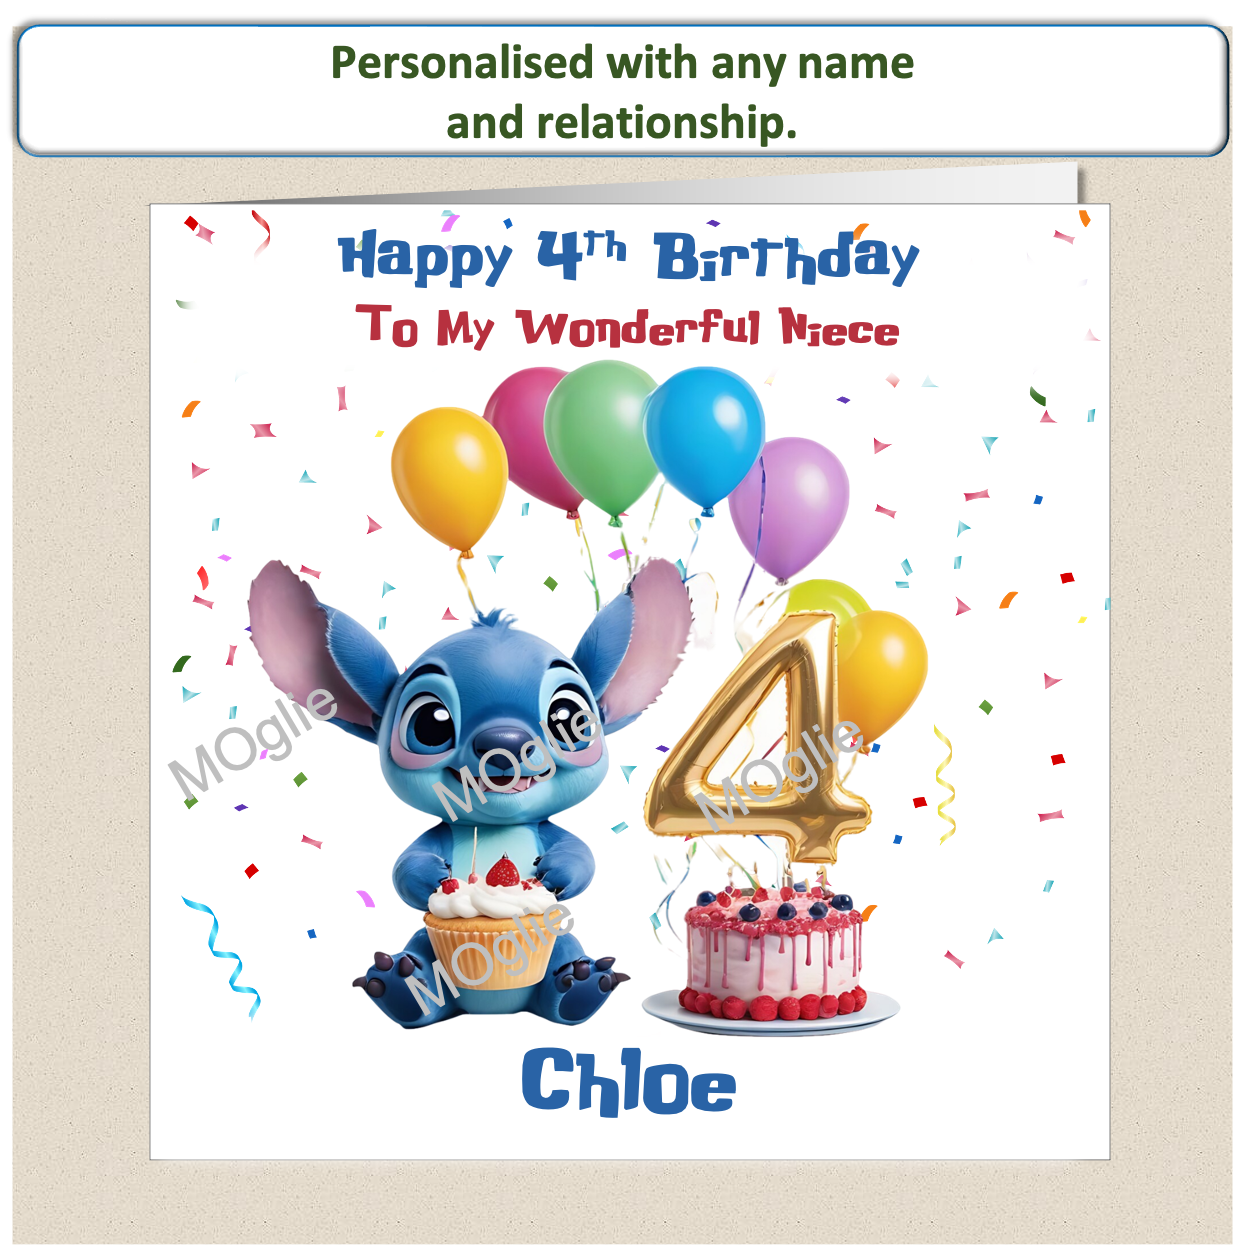 Personalised Lilo and Stitch 4th Birthday Cards with name and relationship